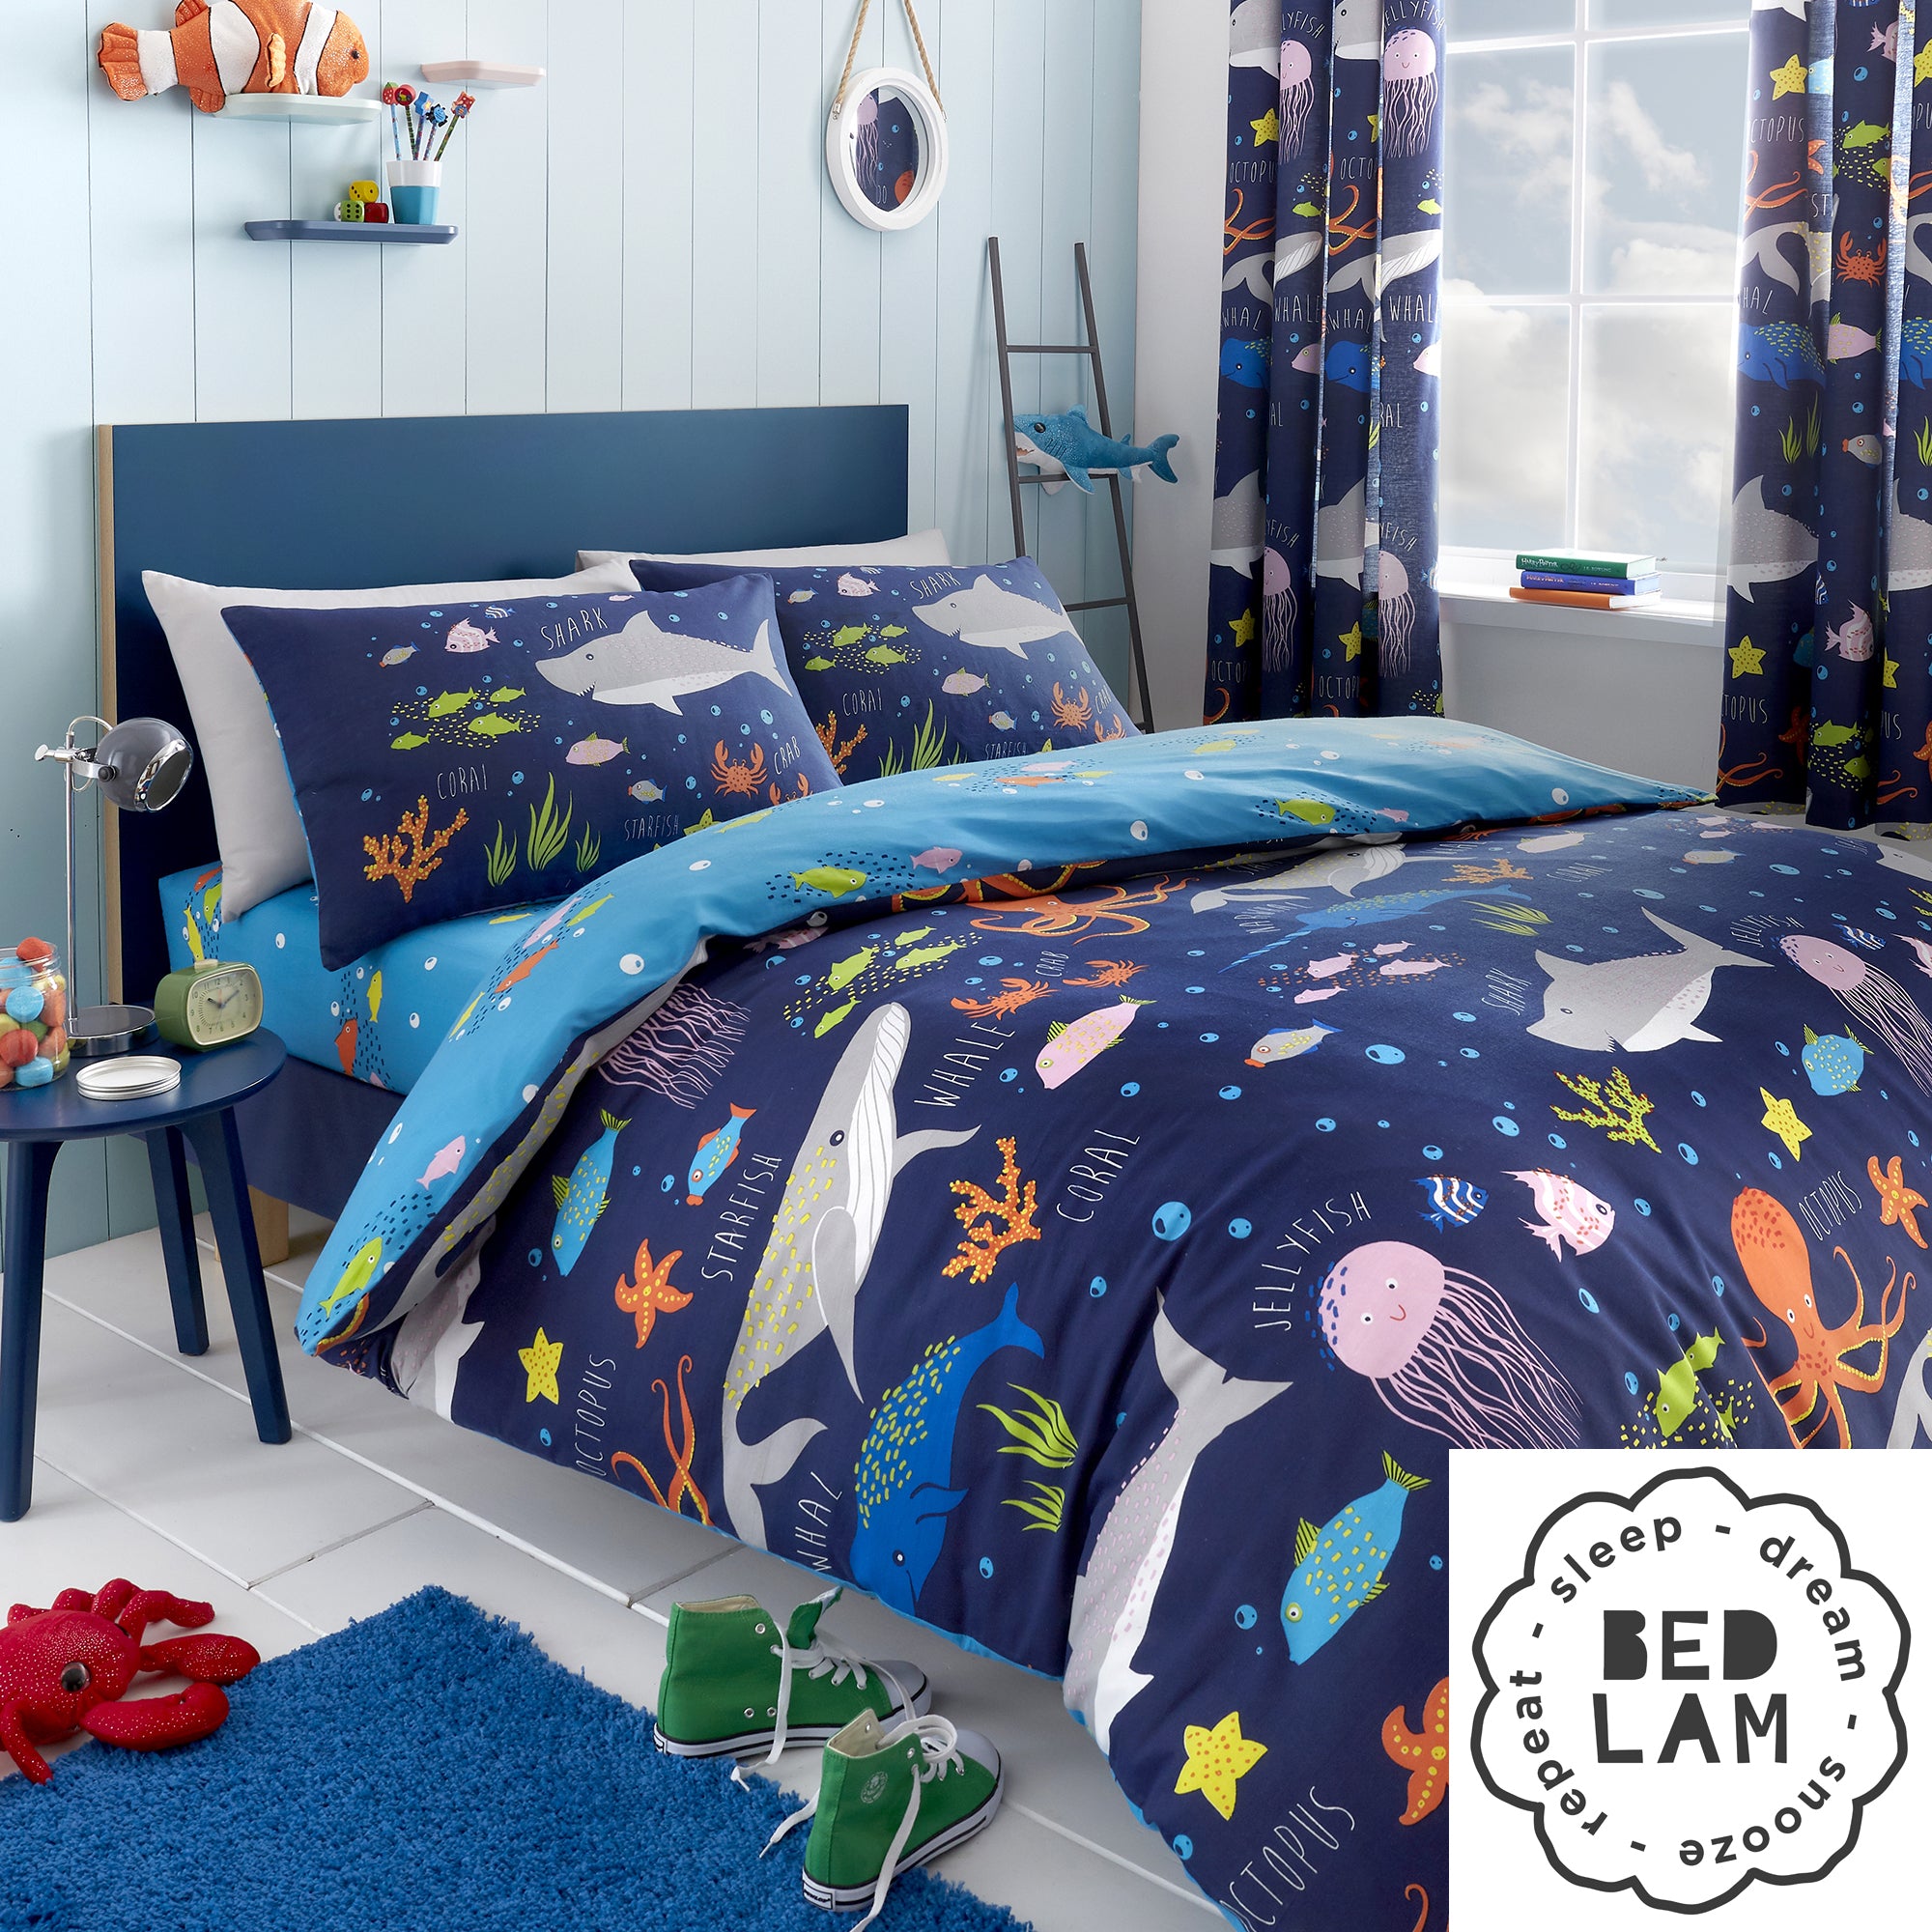 Sea Life - Glow In The Dark Duvet Cover Set, Curtains & Fitted Sheets - by Bedlam